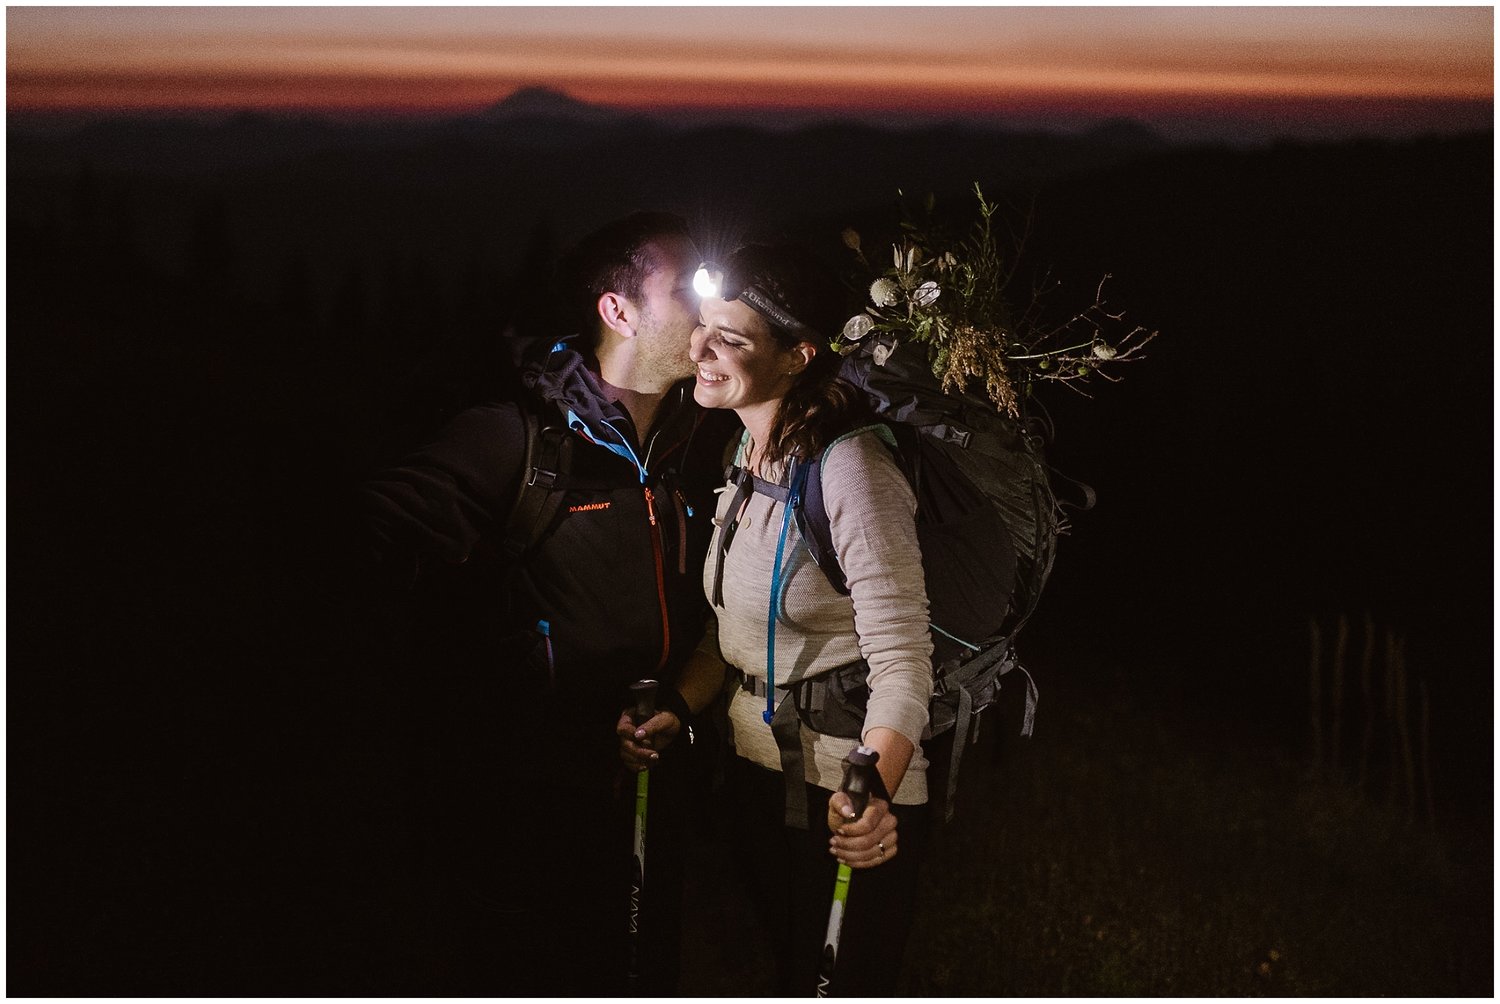 Groom kisses the bride on her cheek during a sunrise hike. Her headlamp lights up their faces. 